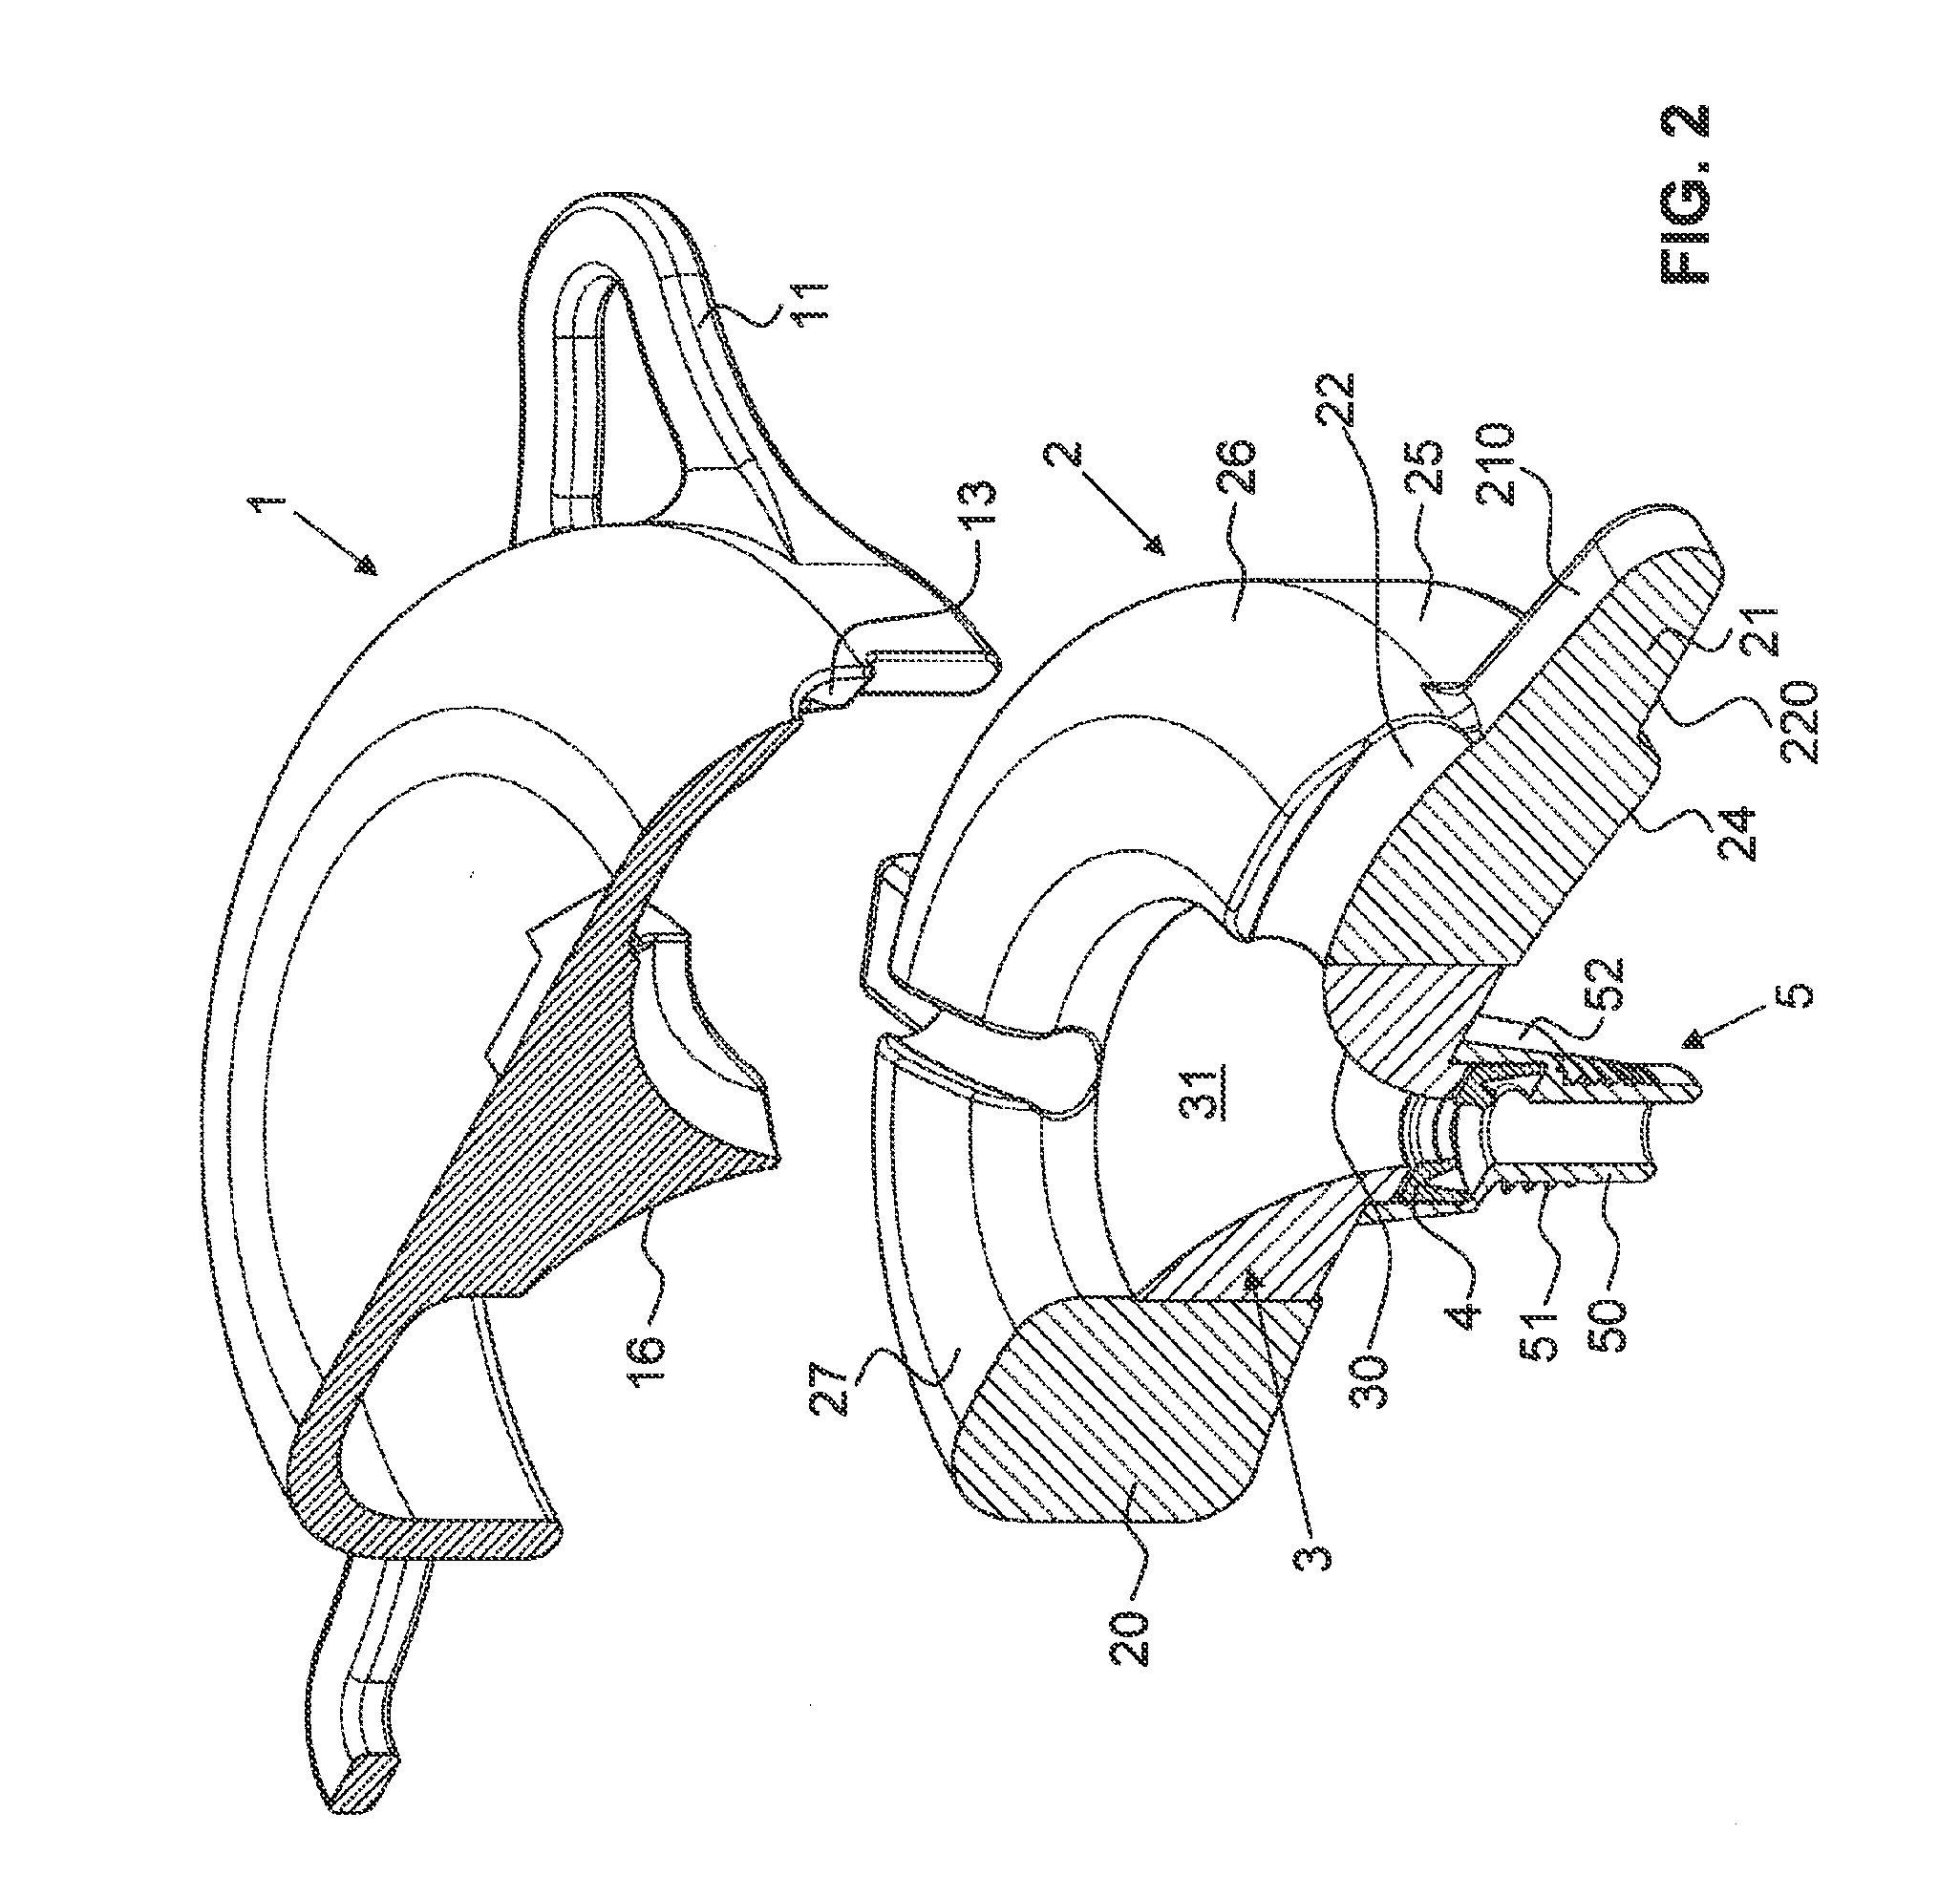 Anchoring device for a line in a skull bore hole